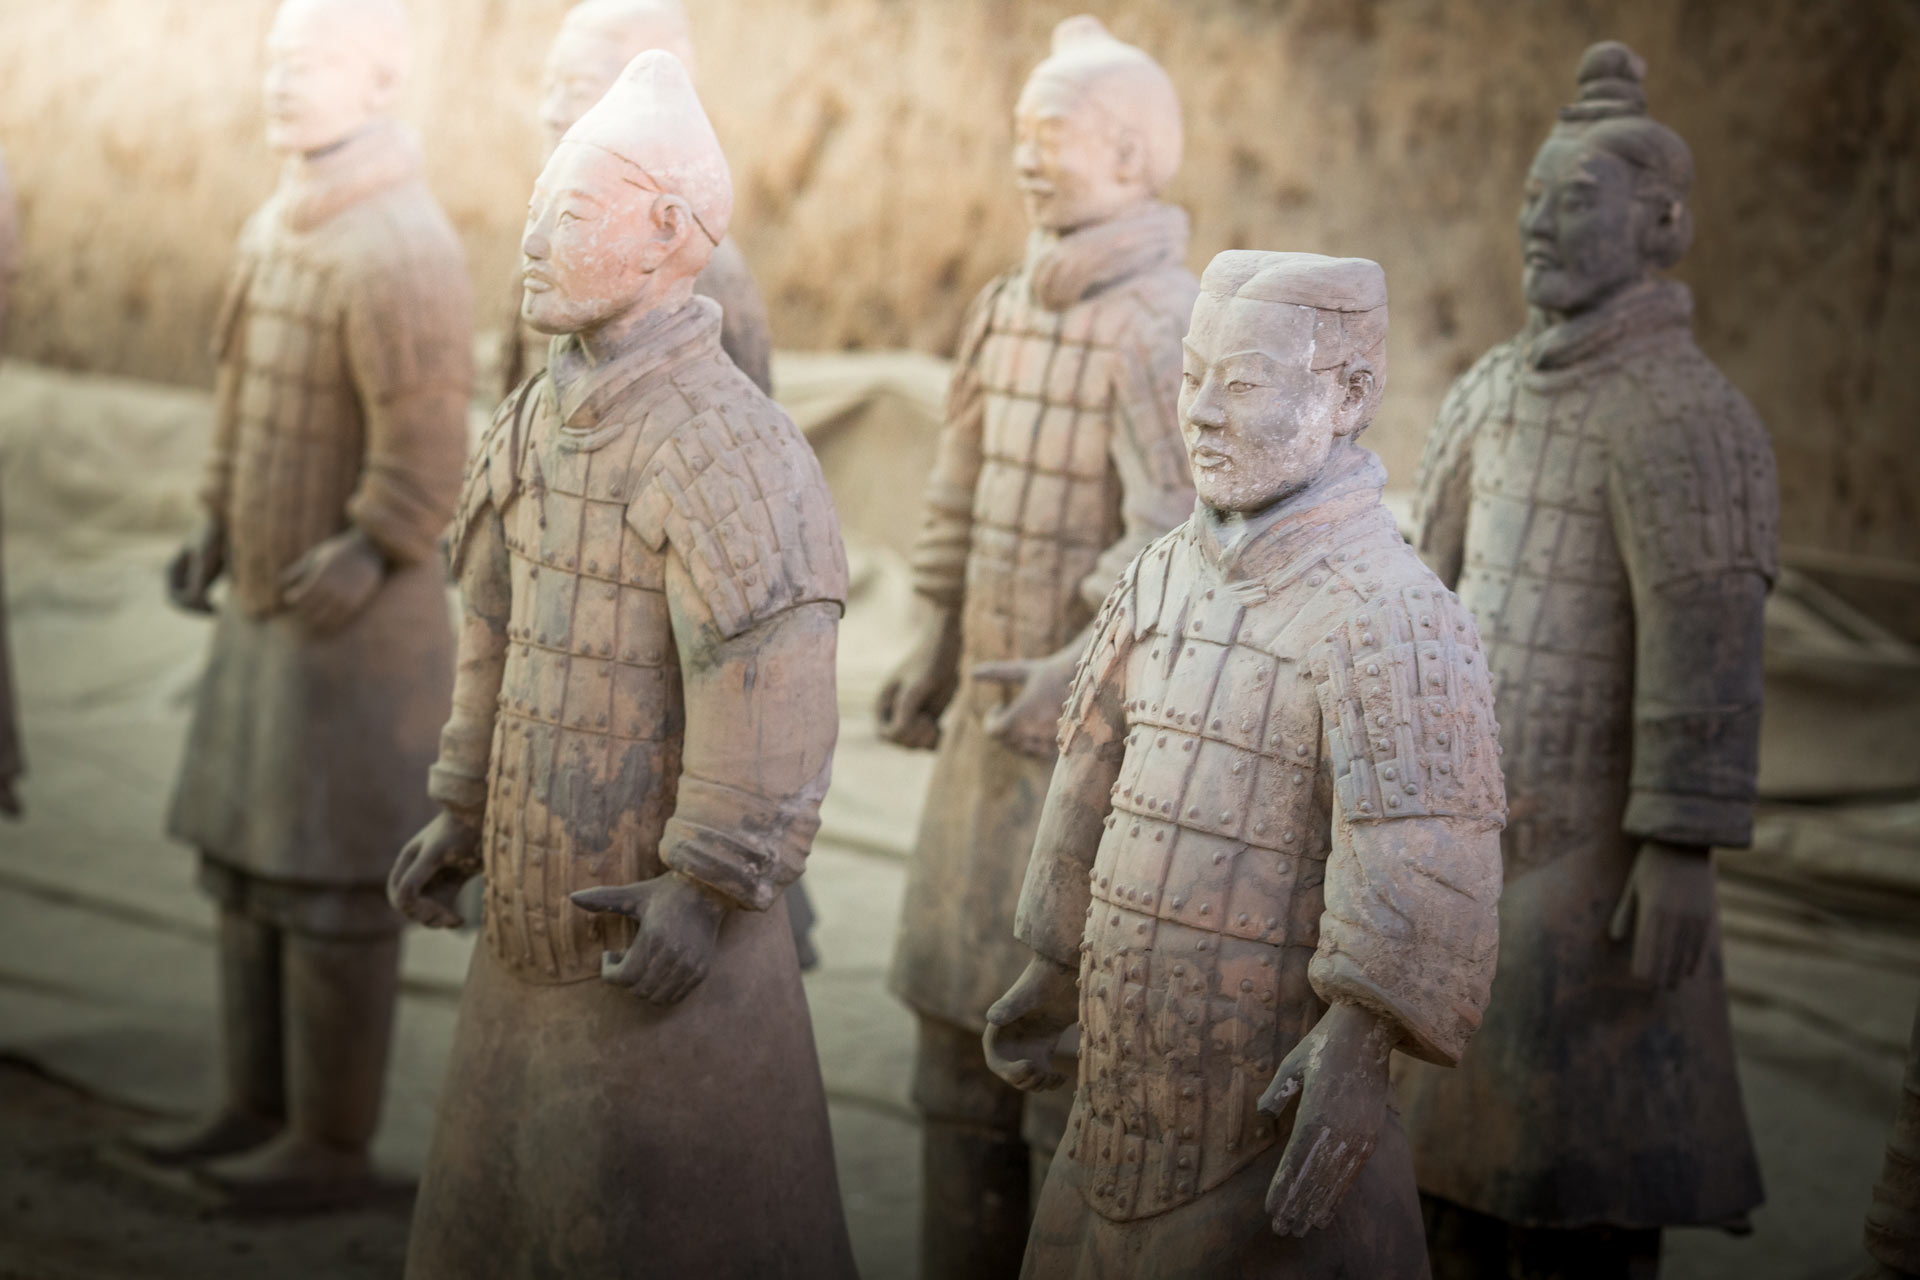 the terracotta warriors of Emperor Qin in Xi'an - 10 days China itinerary